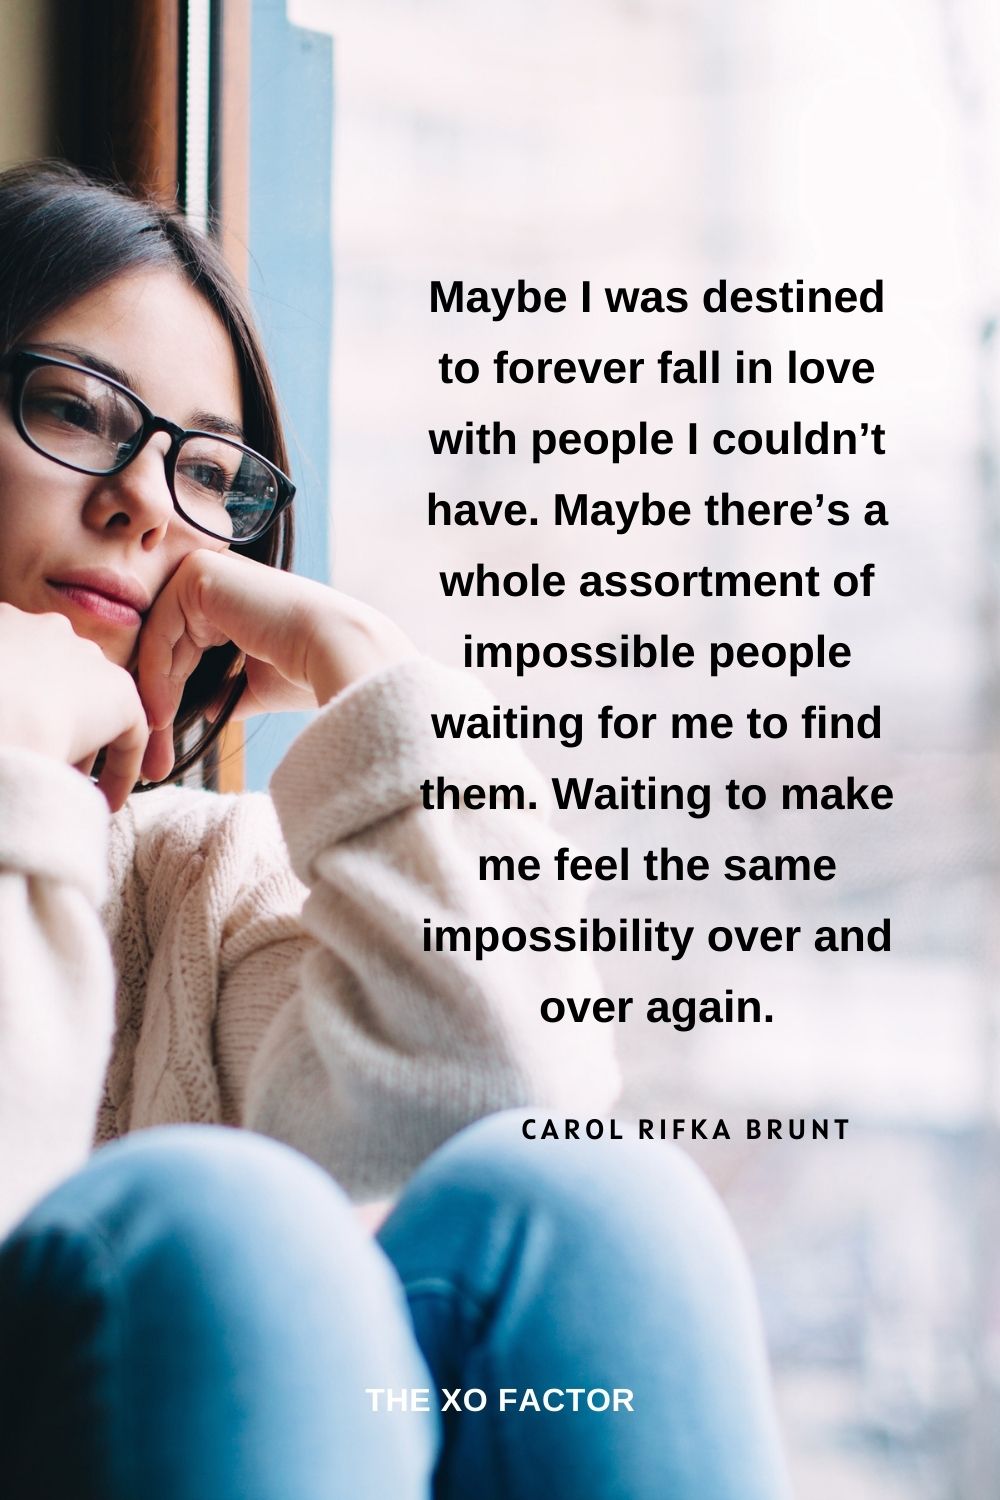 Maybe I was destined to forever fall in love with people I couldn’t have. Maybe there’s a whole assortment of impossible people waiting for me to find them. Waiting to make me feel the same impossibility over and over again. Carol Rifka Brunt